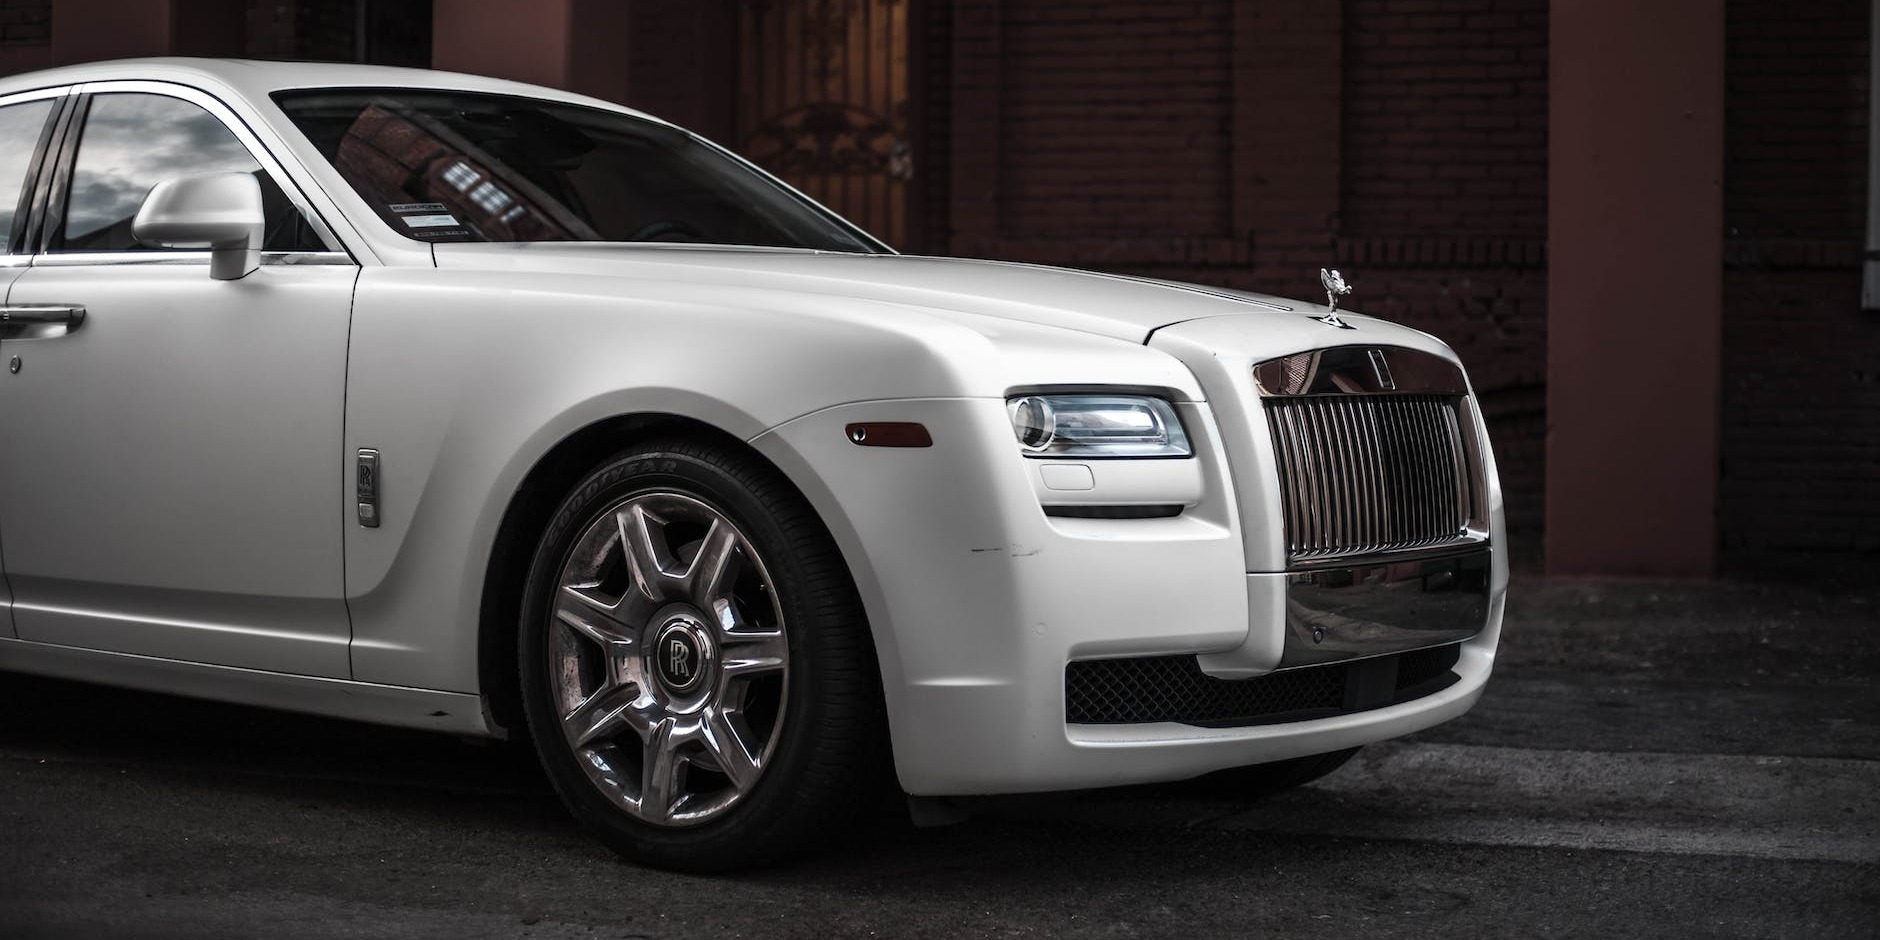 Why the Rolls Royce Ghost is the Epitome of Luxury for Your South Yorkshire Event